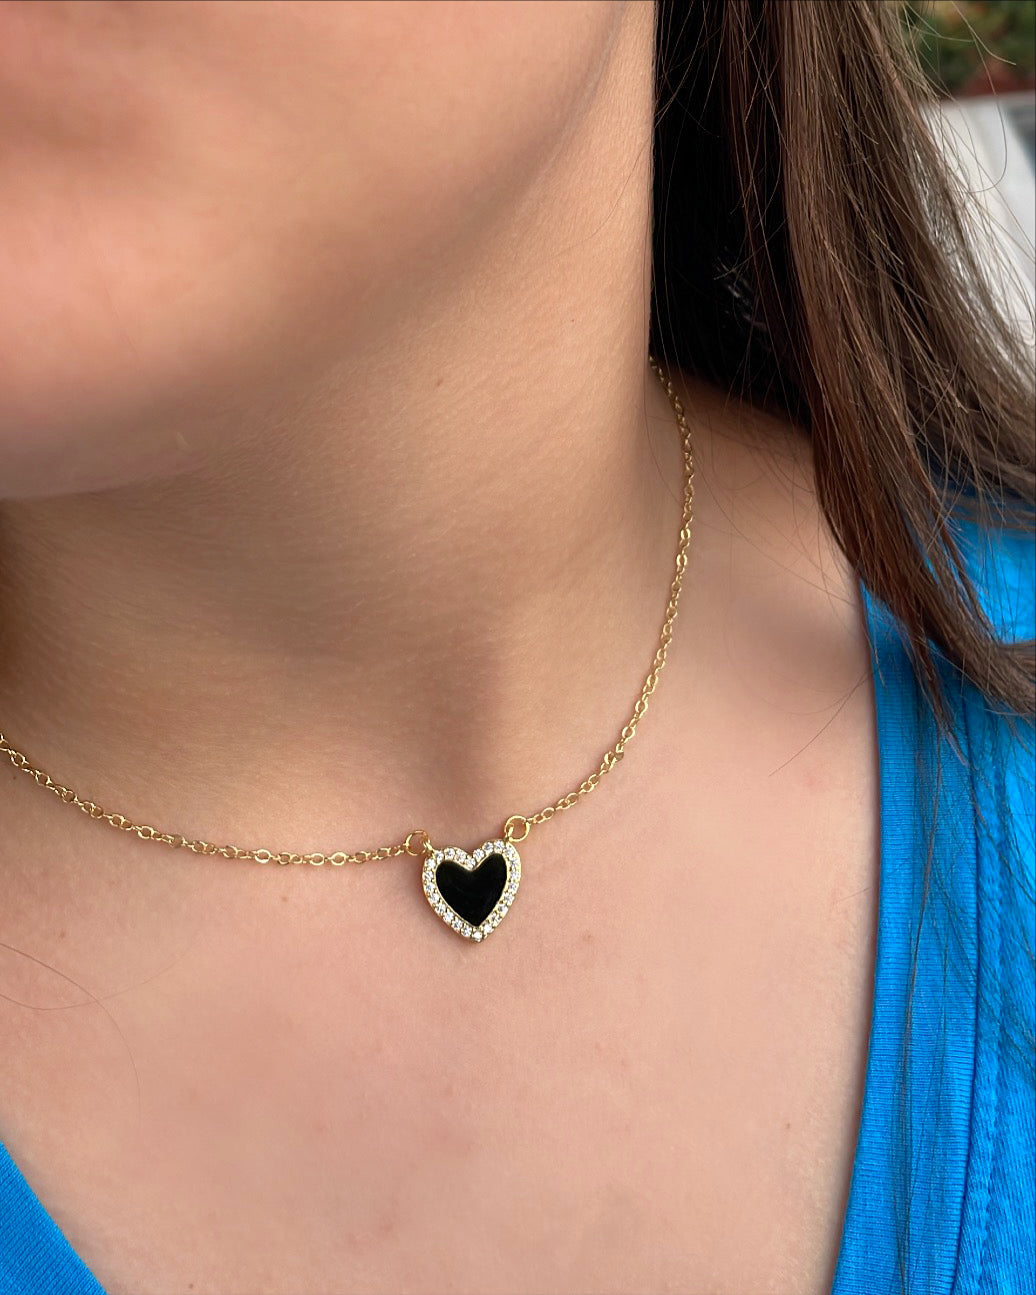 The black heart necklace